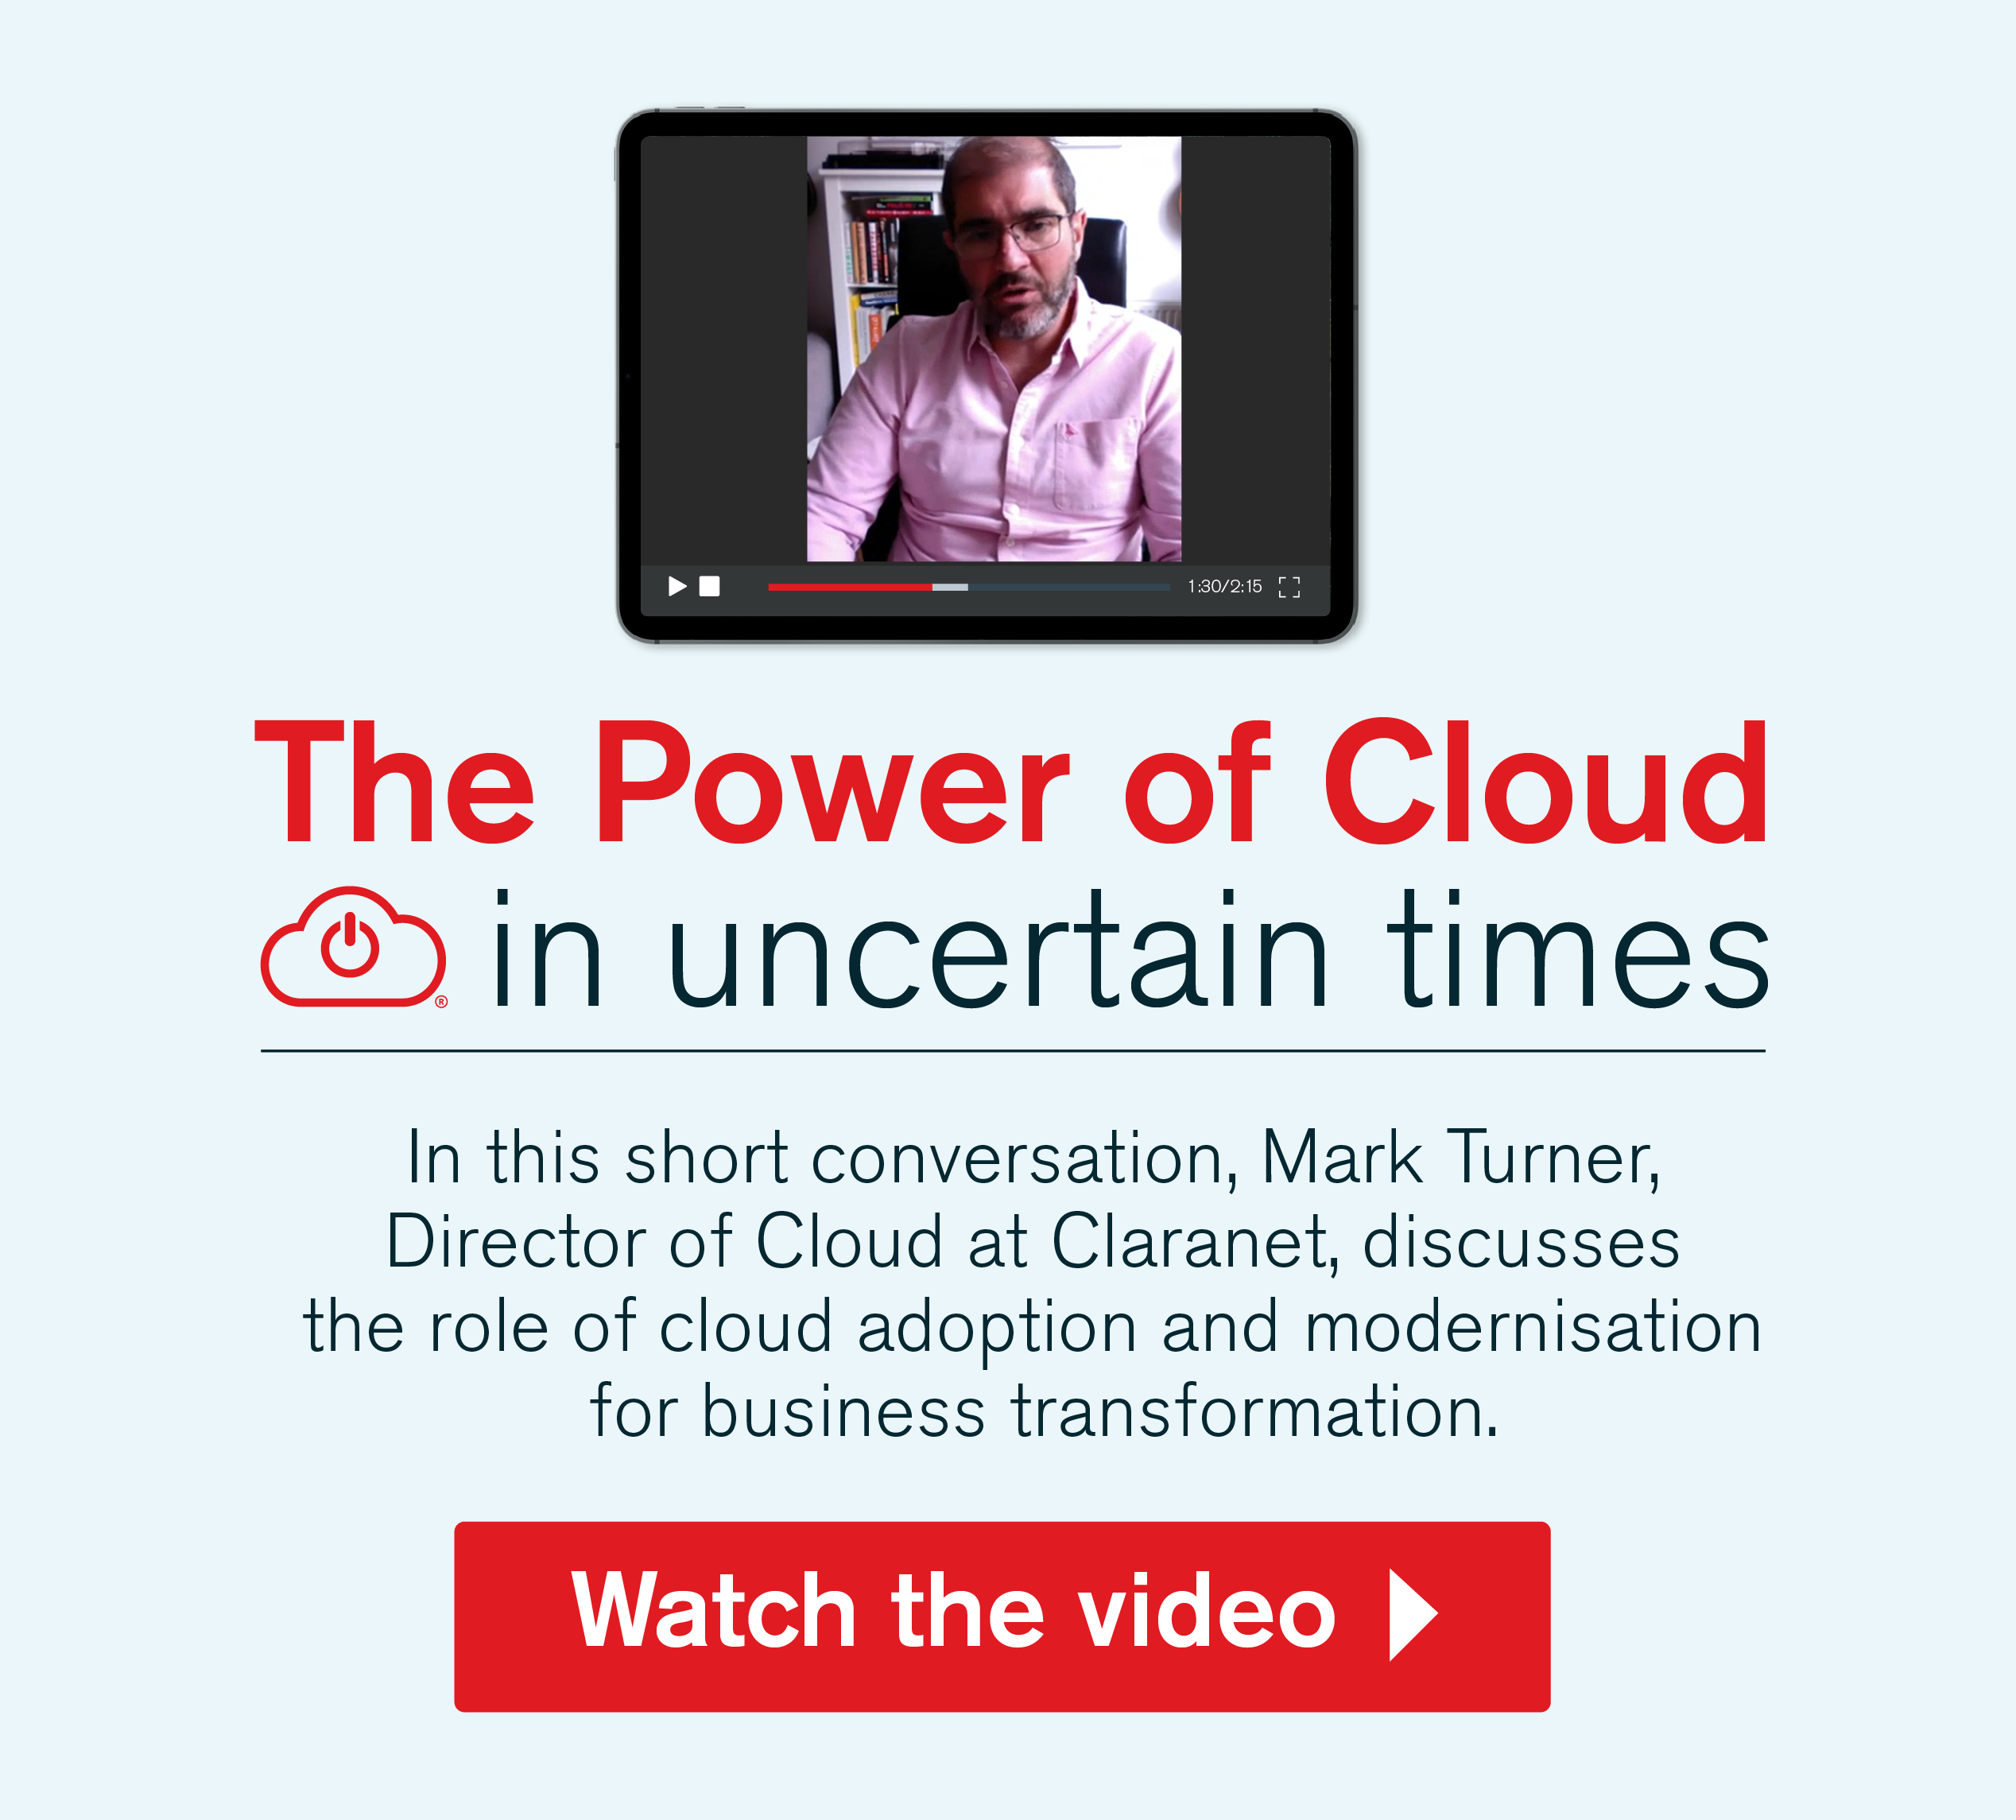 The Power of Cloud - Click here for the video